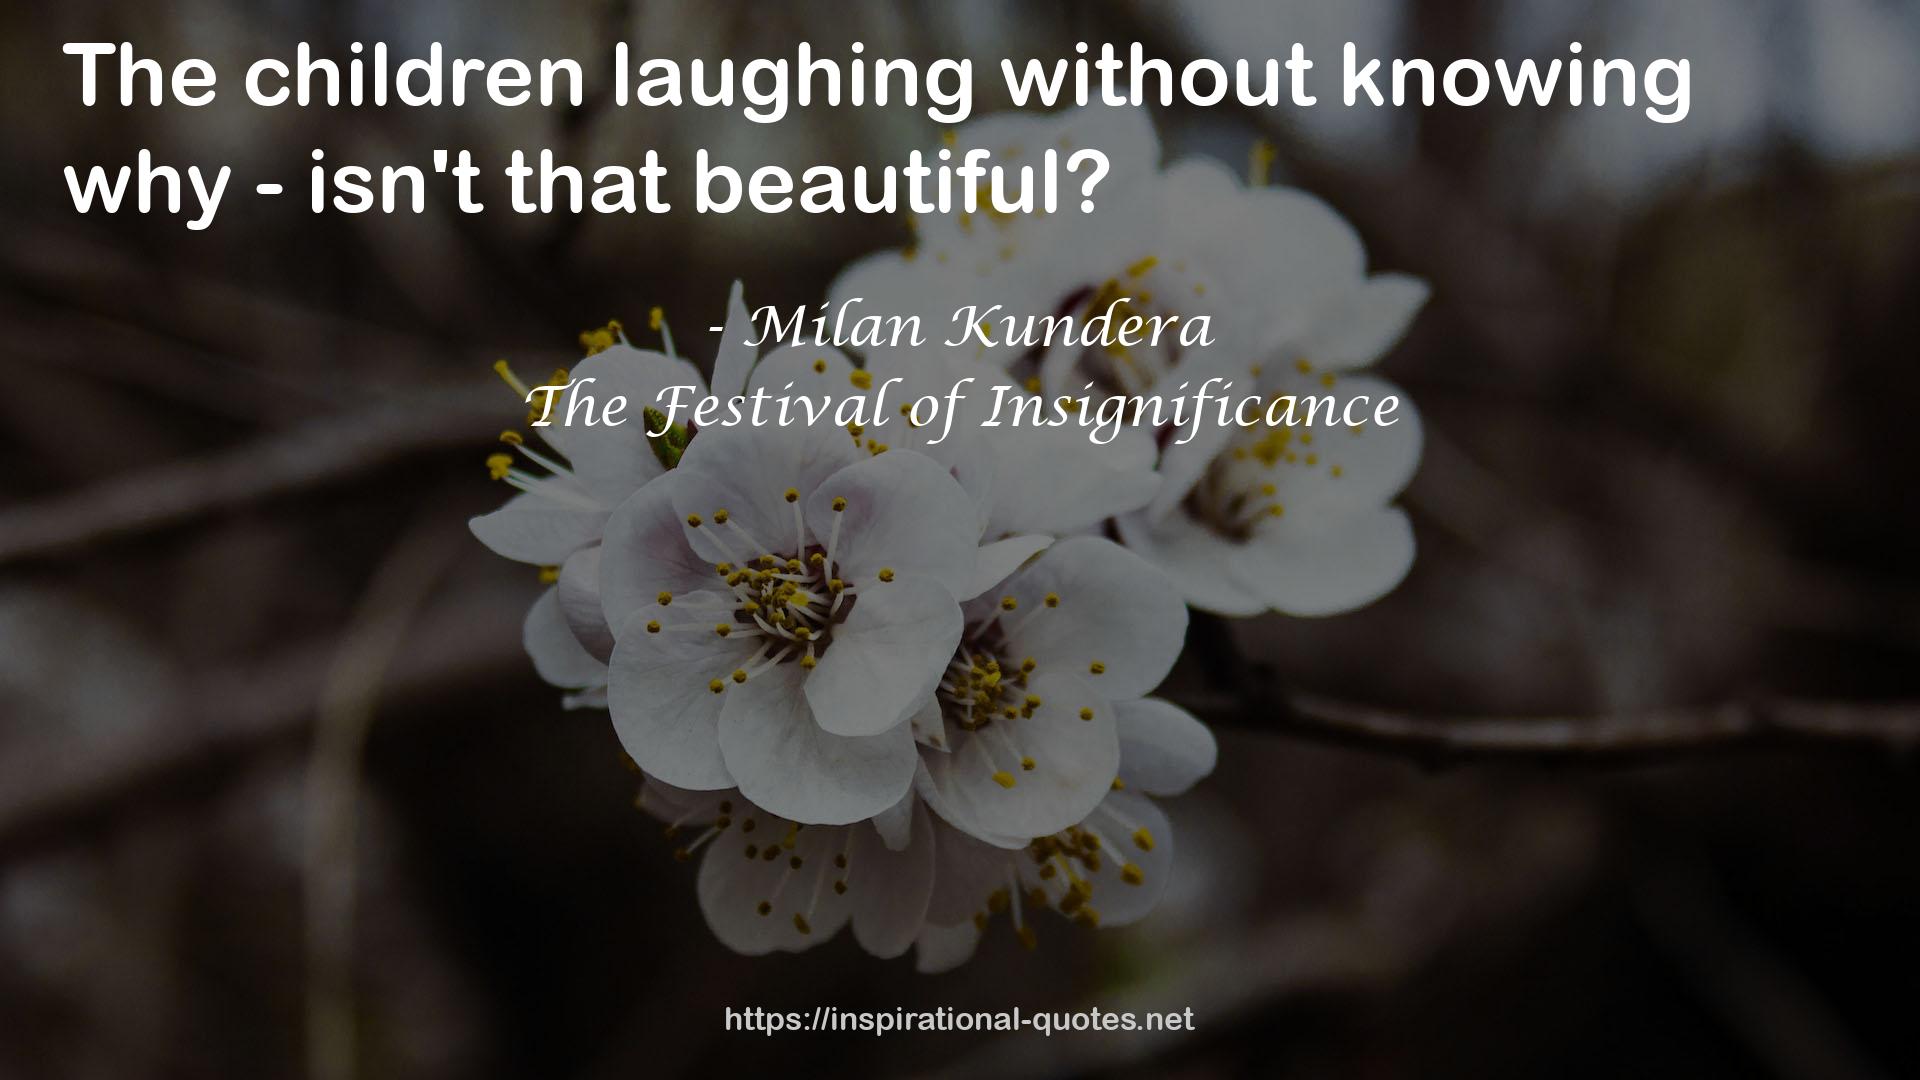 The Festival of Insignificance QUOTES